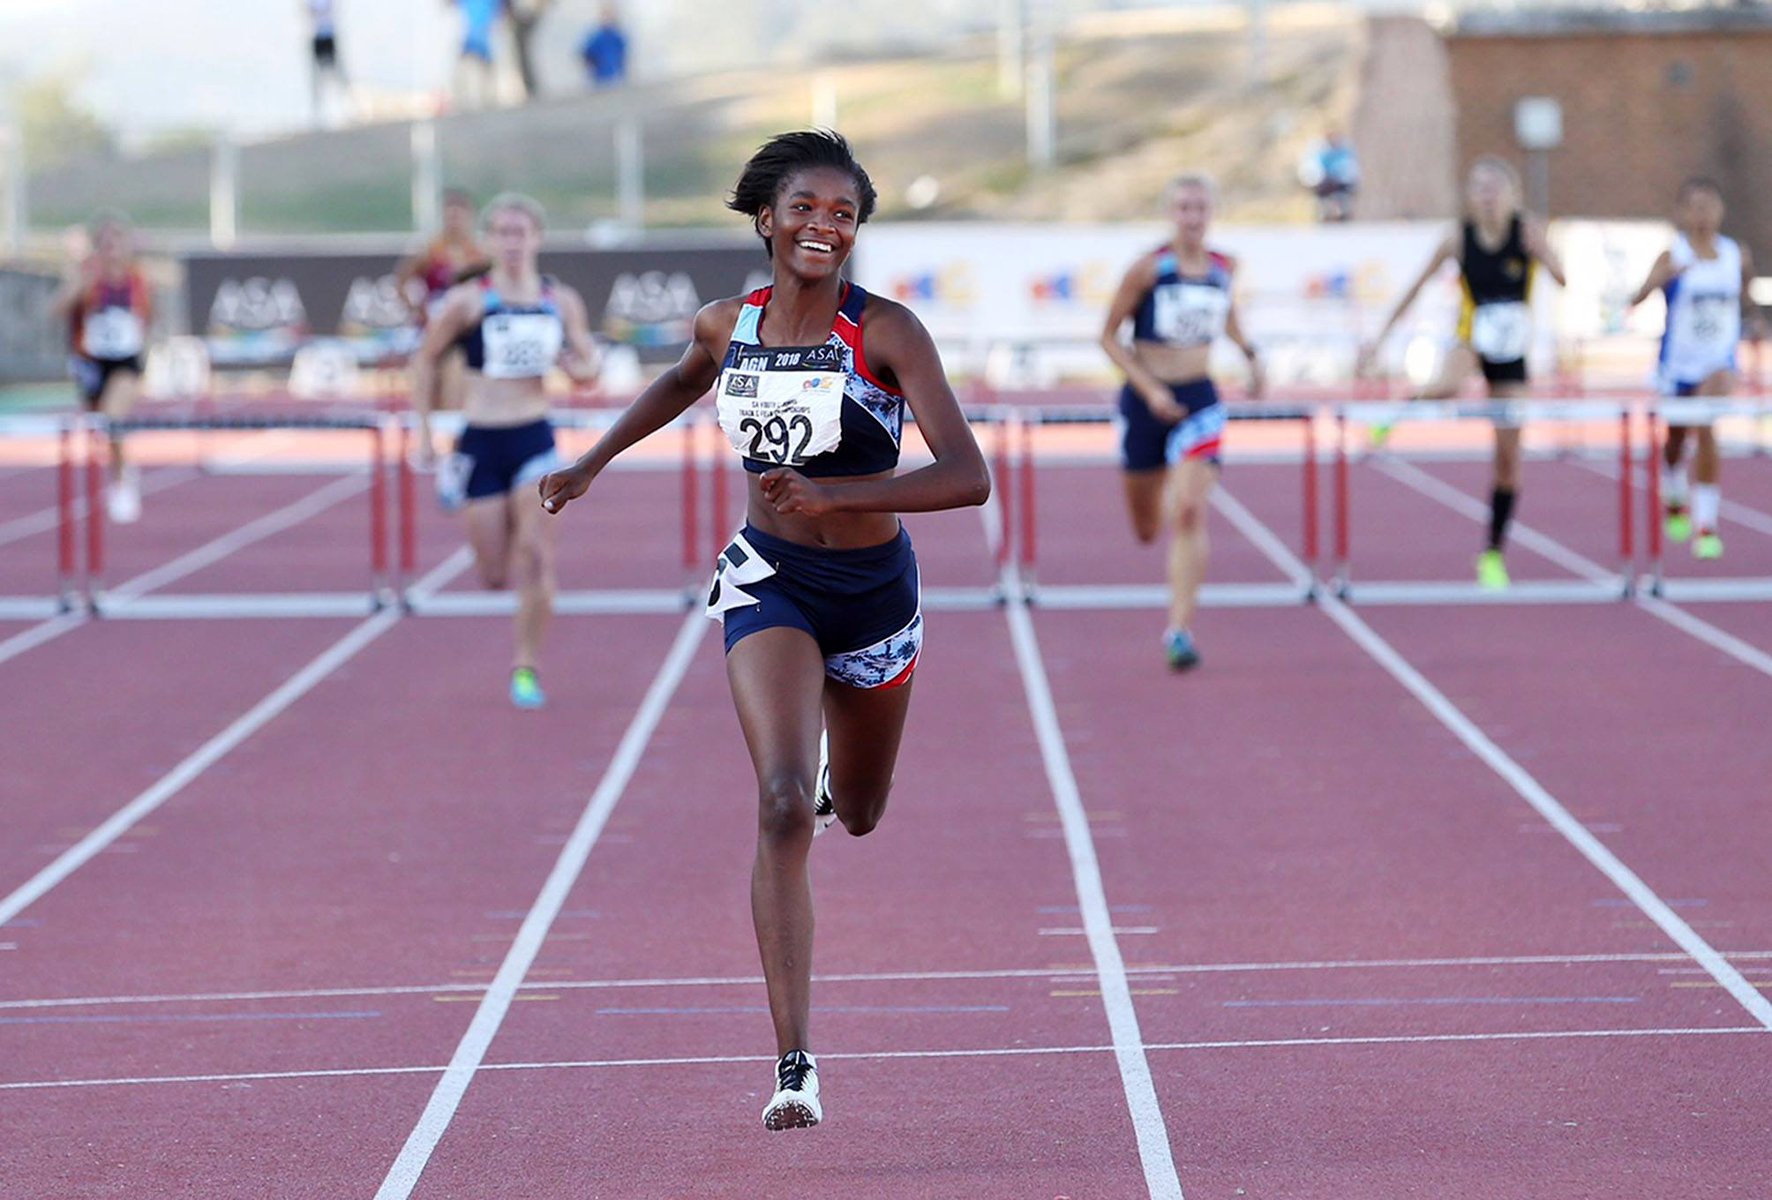 Gontse Morake breaking the South African 400m hurdles Under-18 record on the first day of ASA Youth and Junior Championships in Paarl on Thursday / Photo Credit: Sibonelo Ngcobo/ ANA Pictures